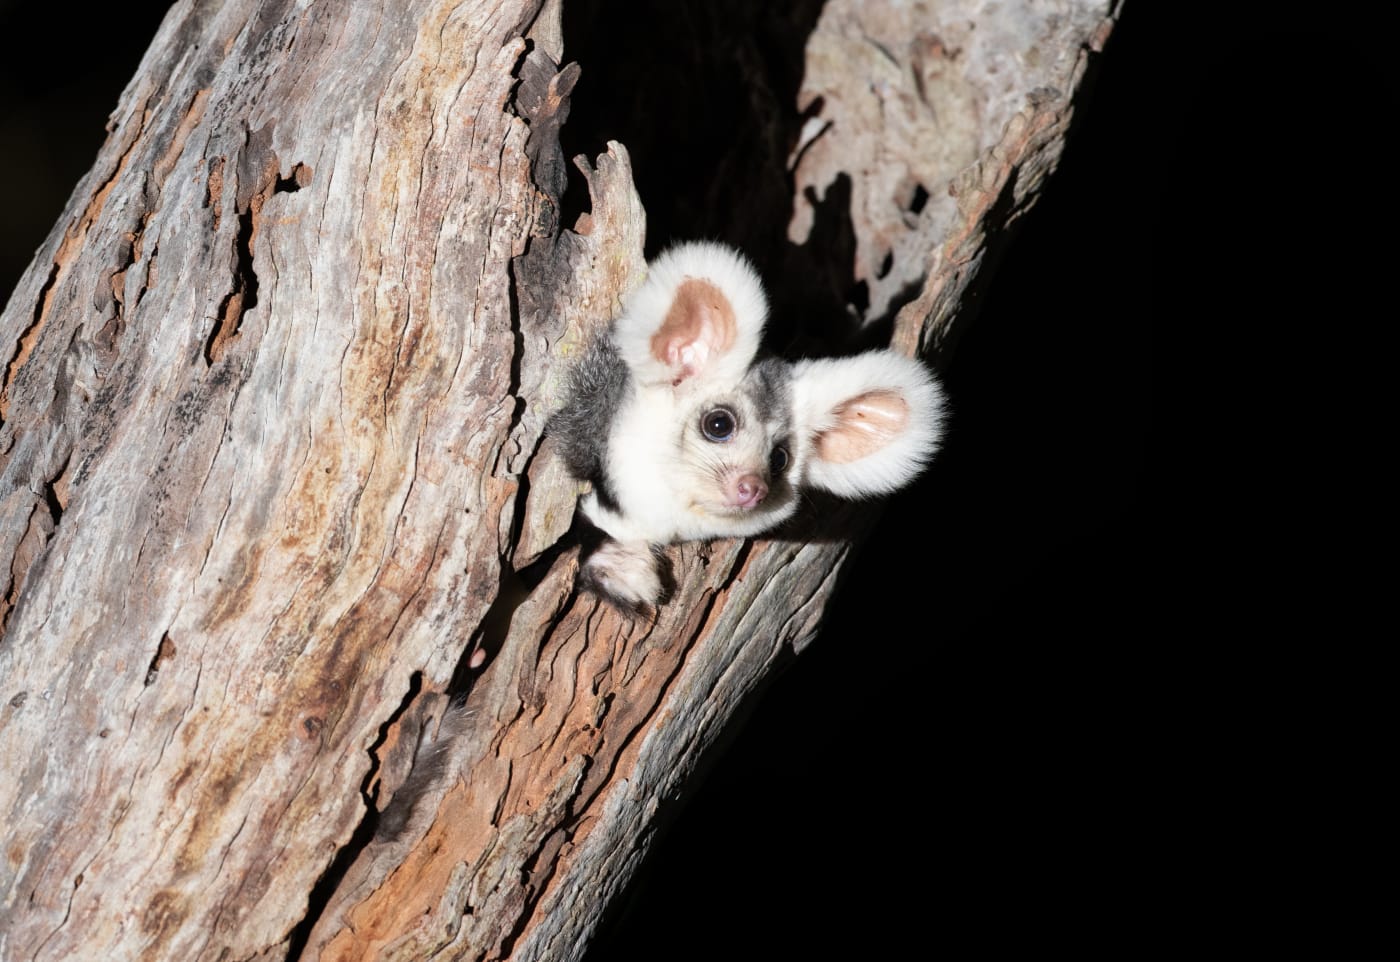 Greater glider in a patch of old growth forest in Munruben, Logan City, south of Brisbane